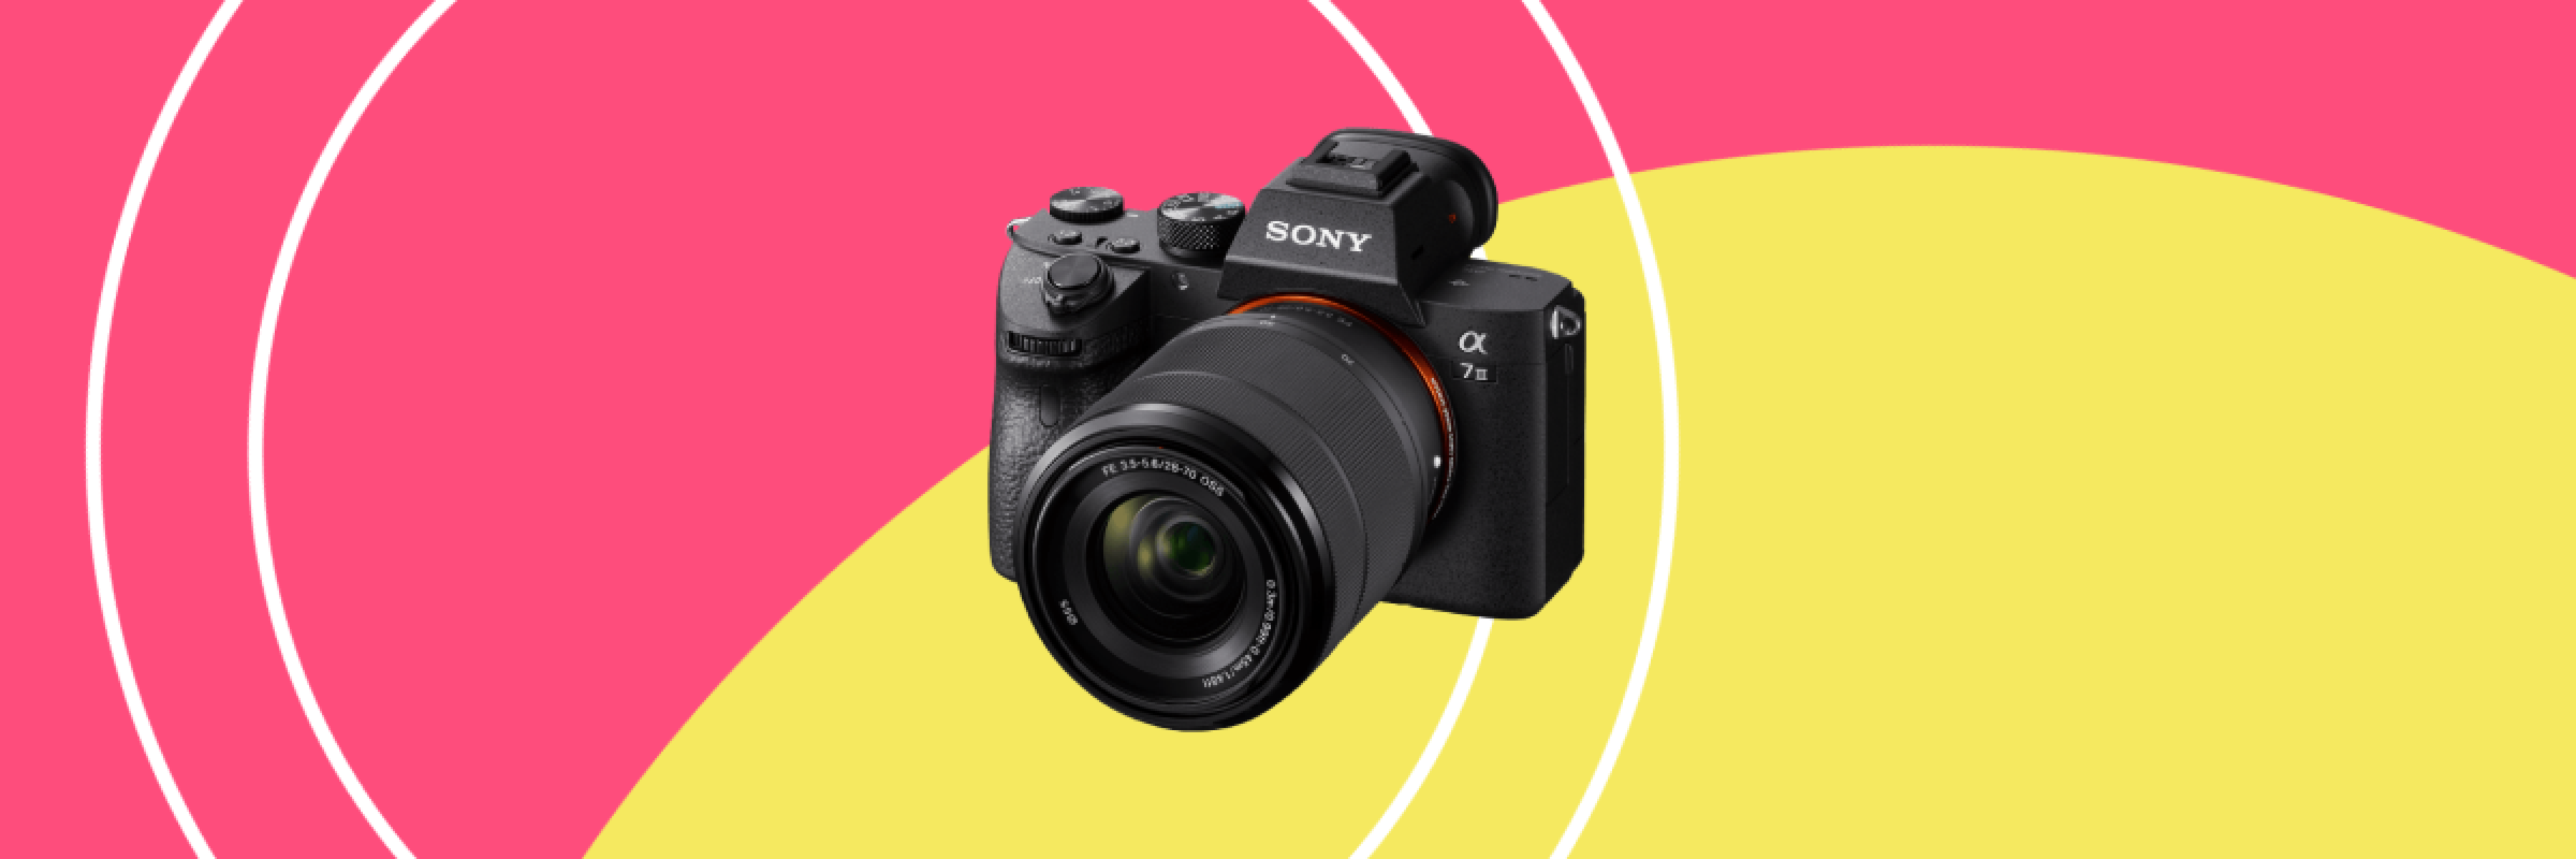 The Sony Alpha 7 III – a great full-frame camera for